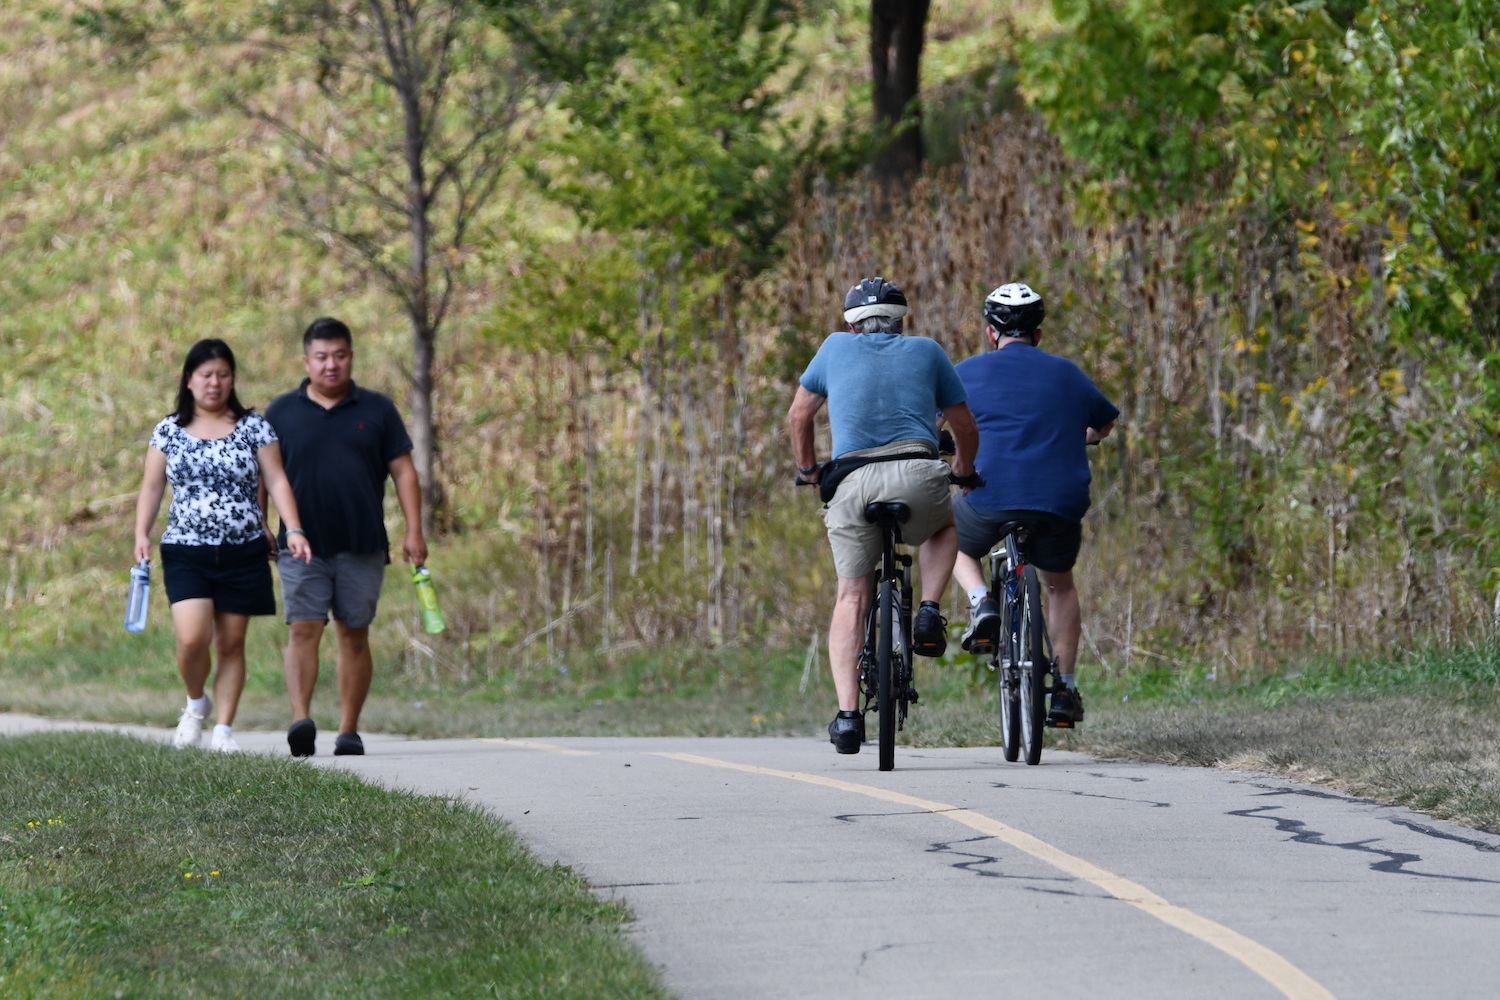 Two people walking and two people biking on a paved trail.